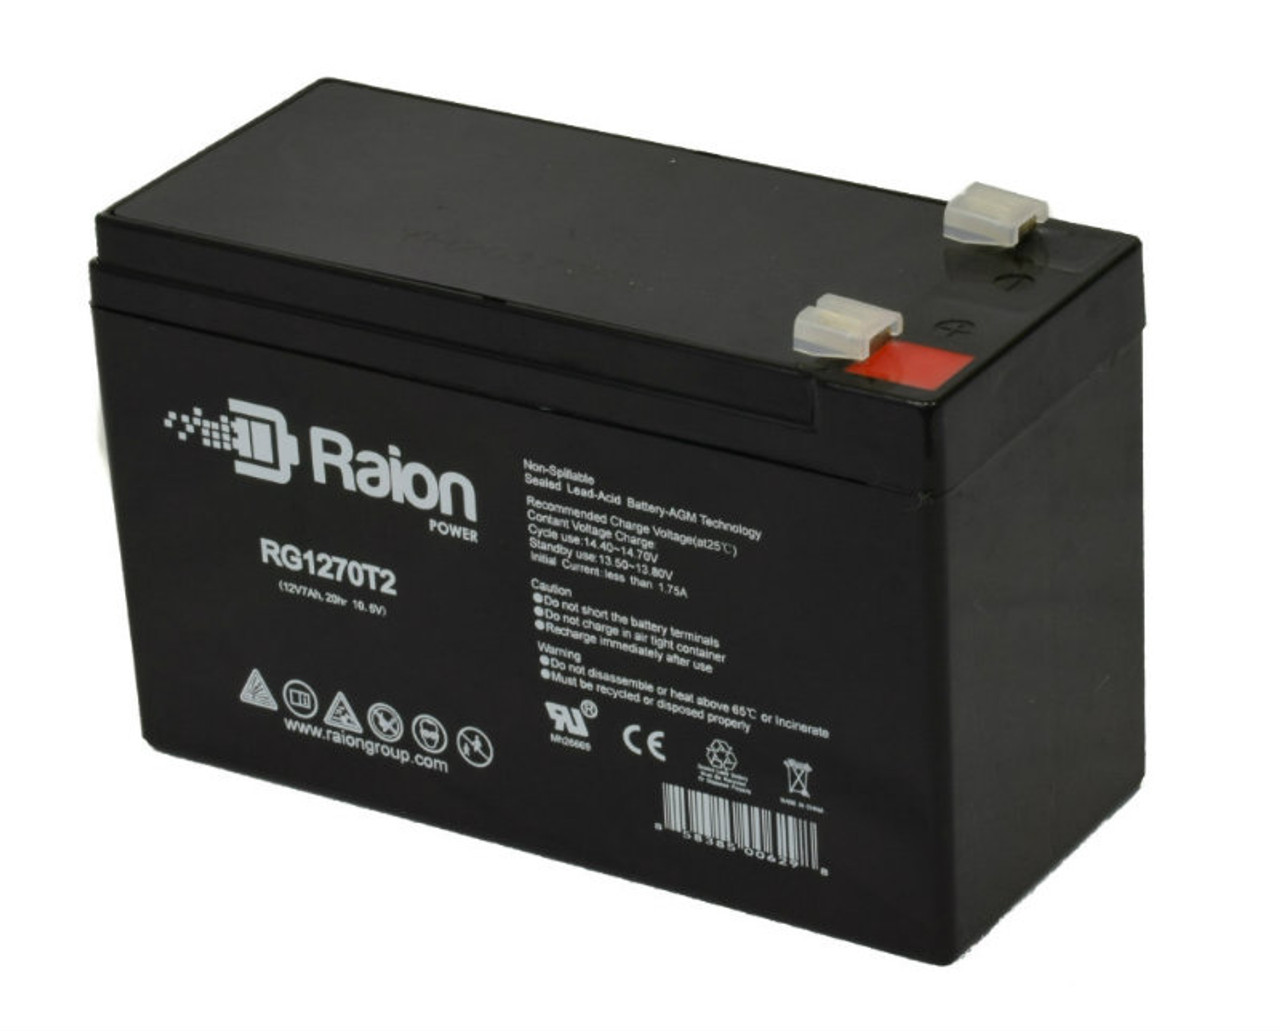 Raion Power Replacement 12V 7Ah Battery for Fengri 6-FM-7.2 - 1 Pack